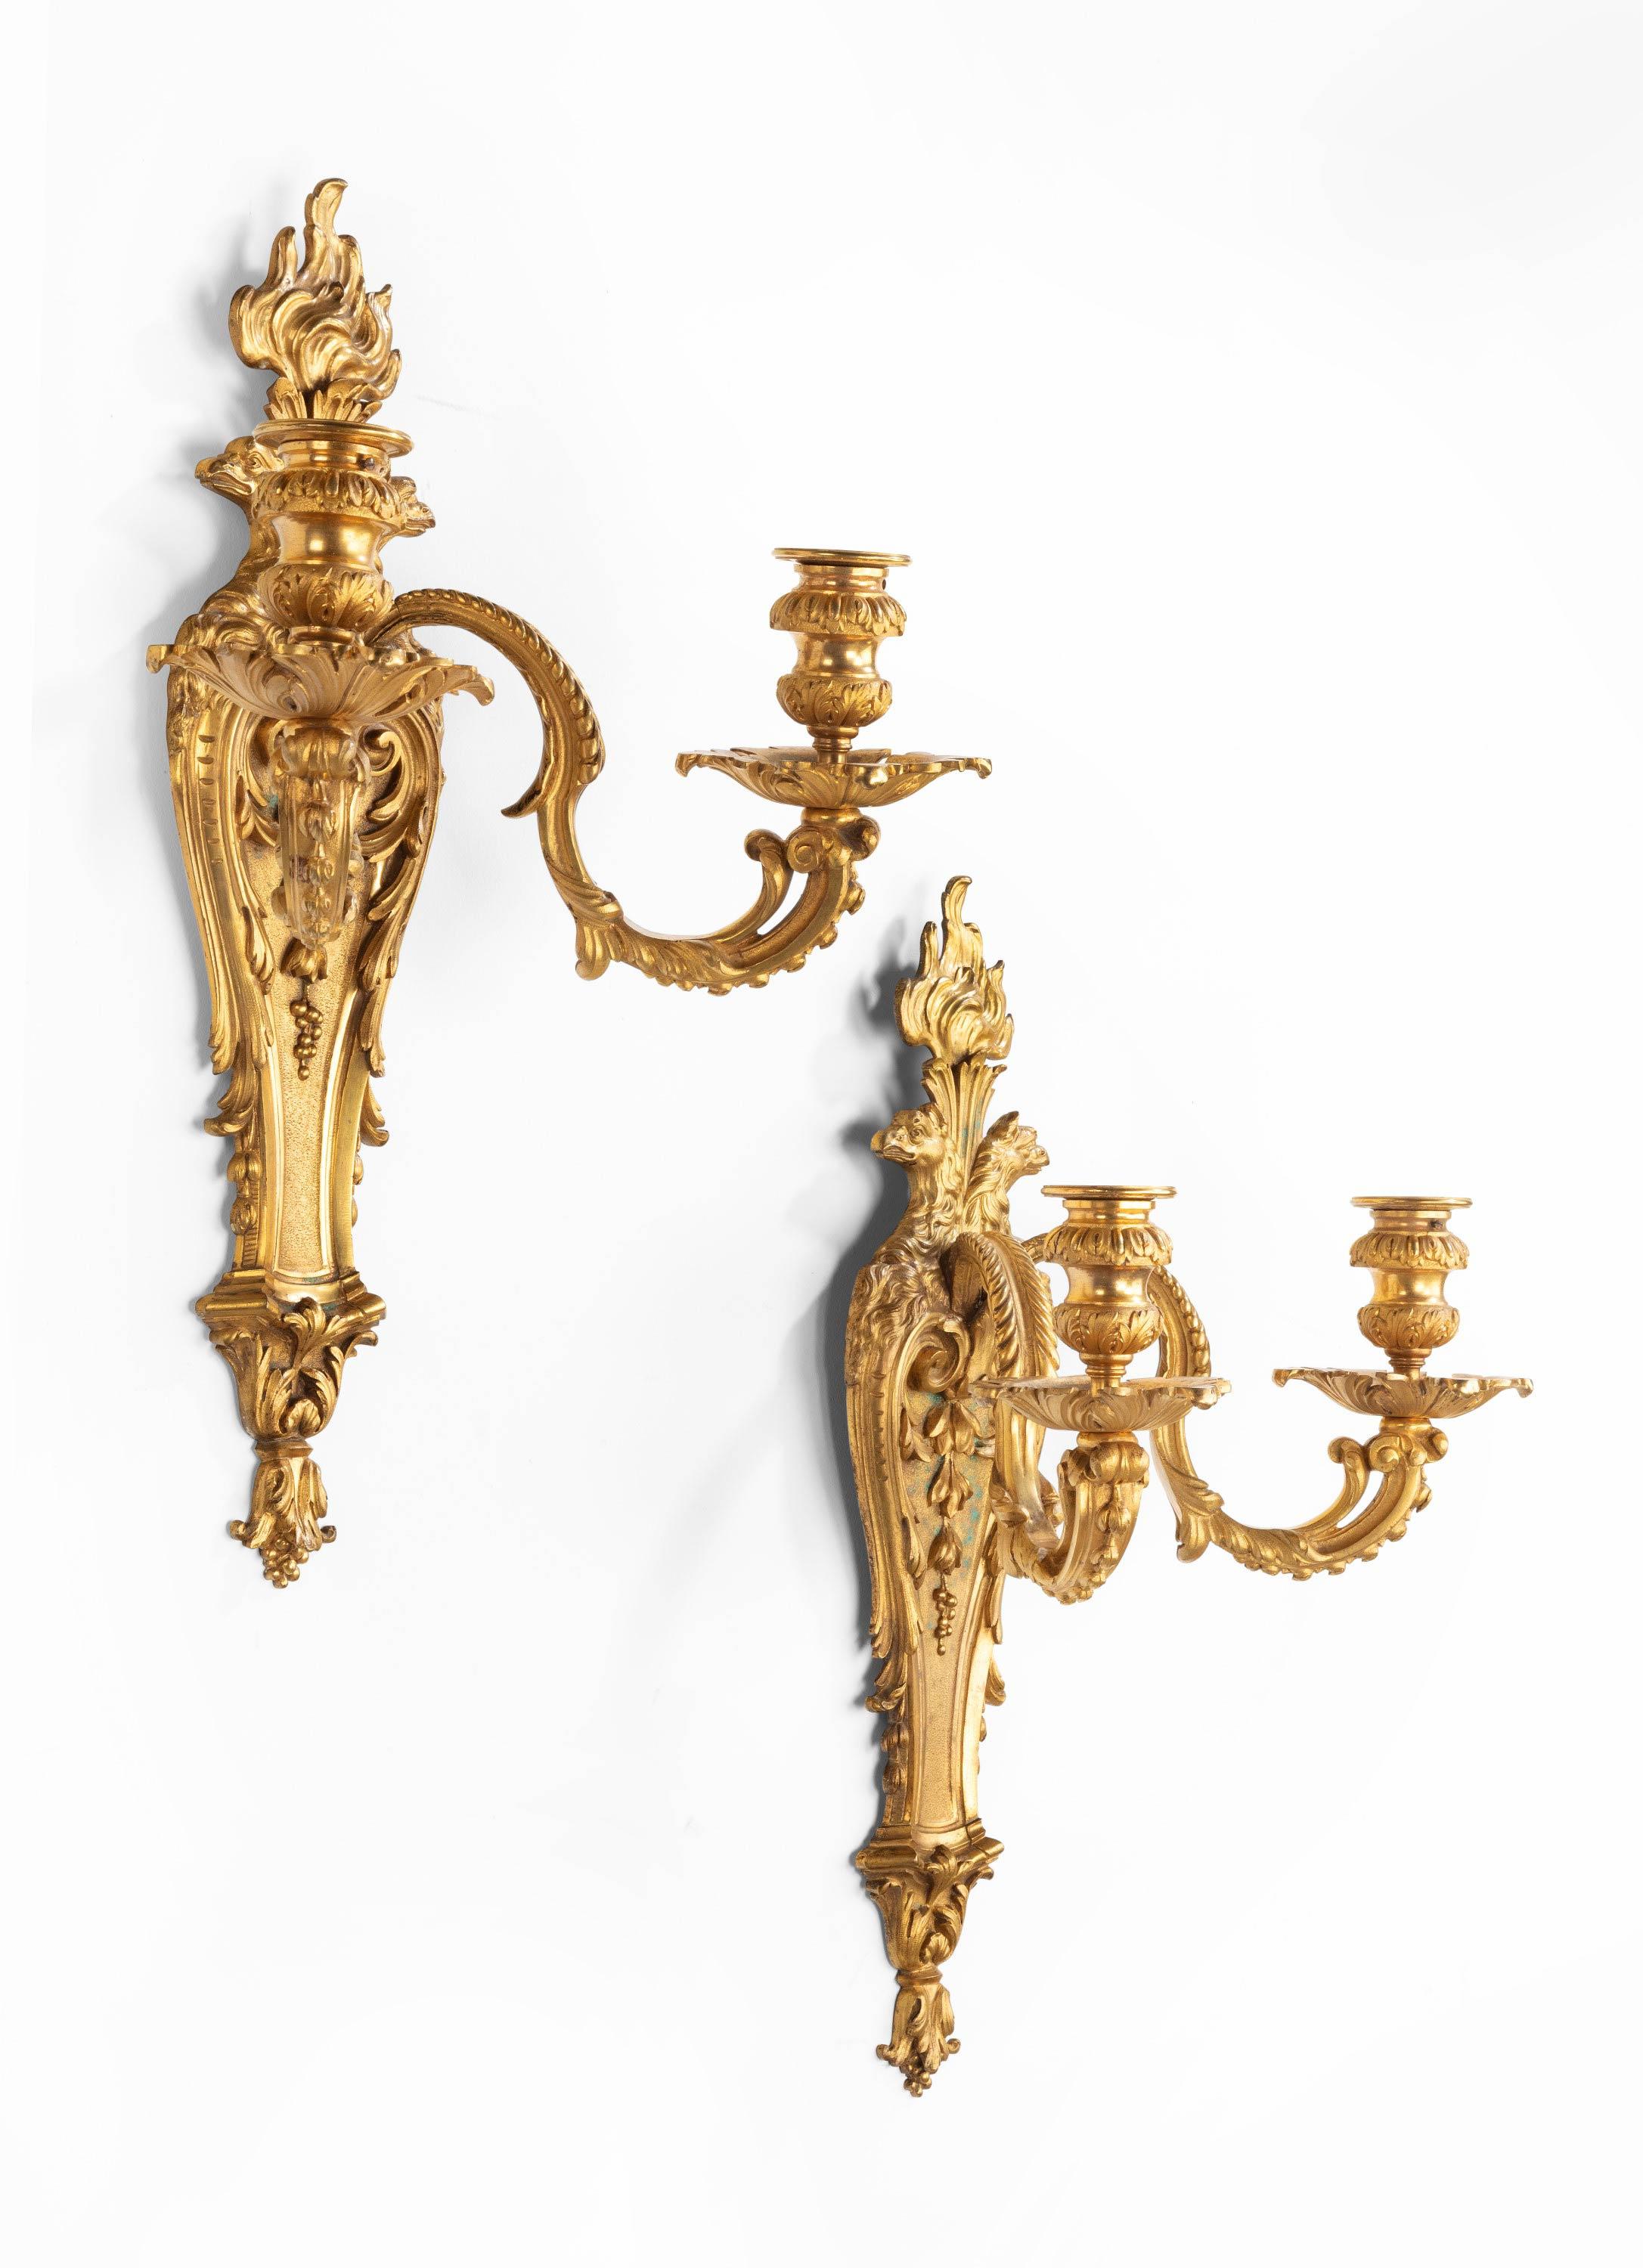 English Outstanding Pair or Ormolu Wall Lights For Sale